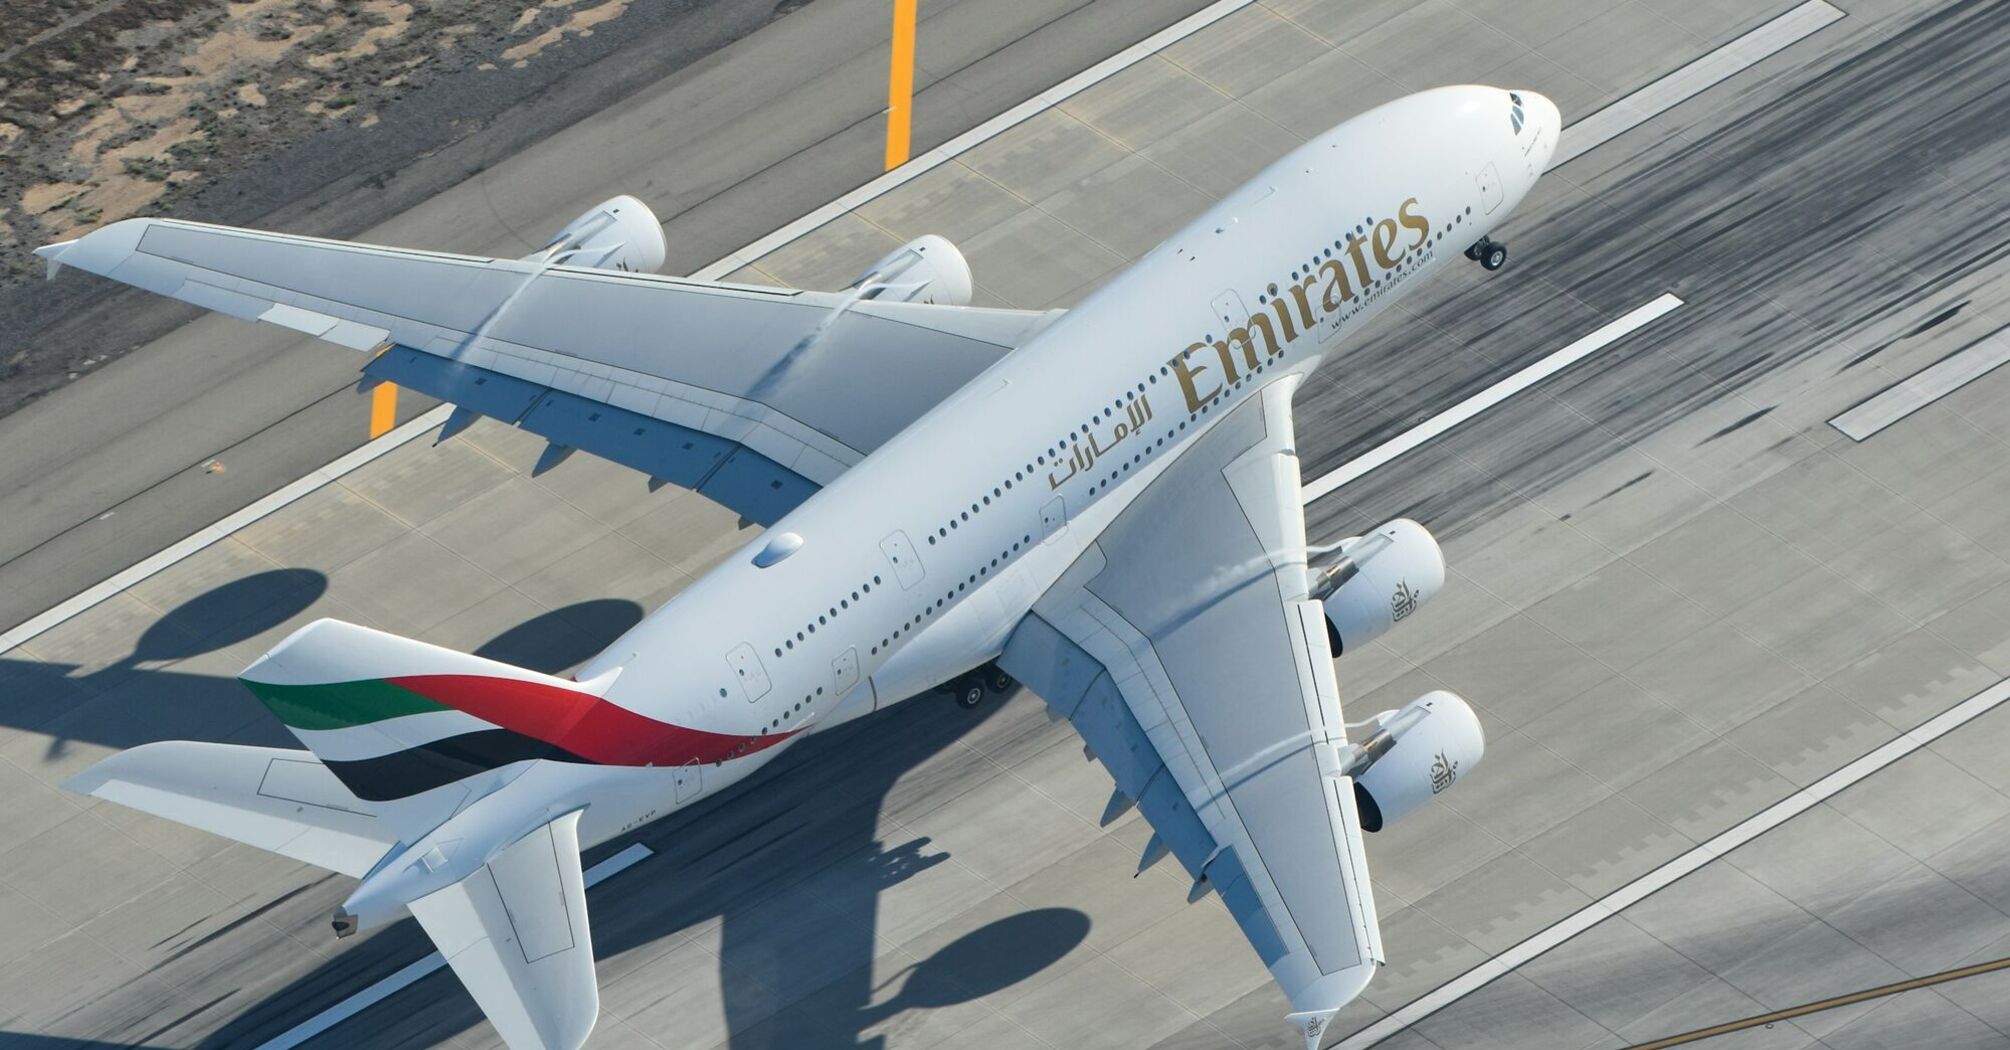 Emirates airplane taking off from the runway